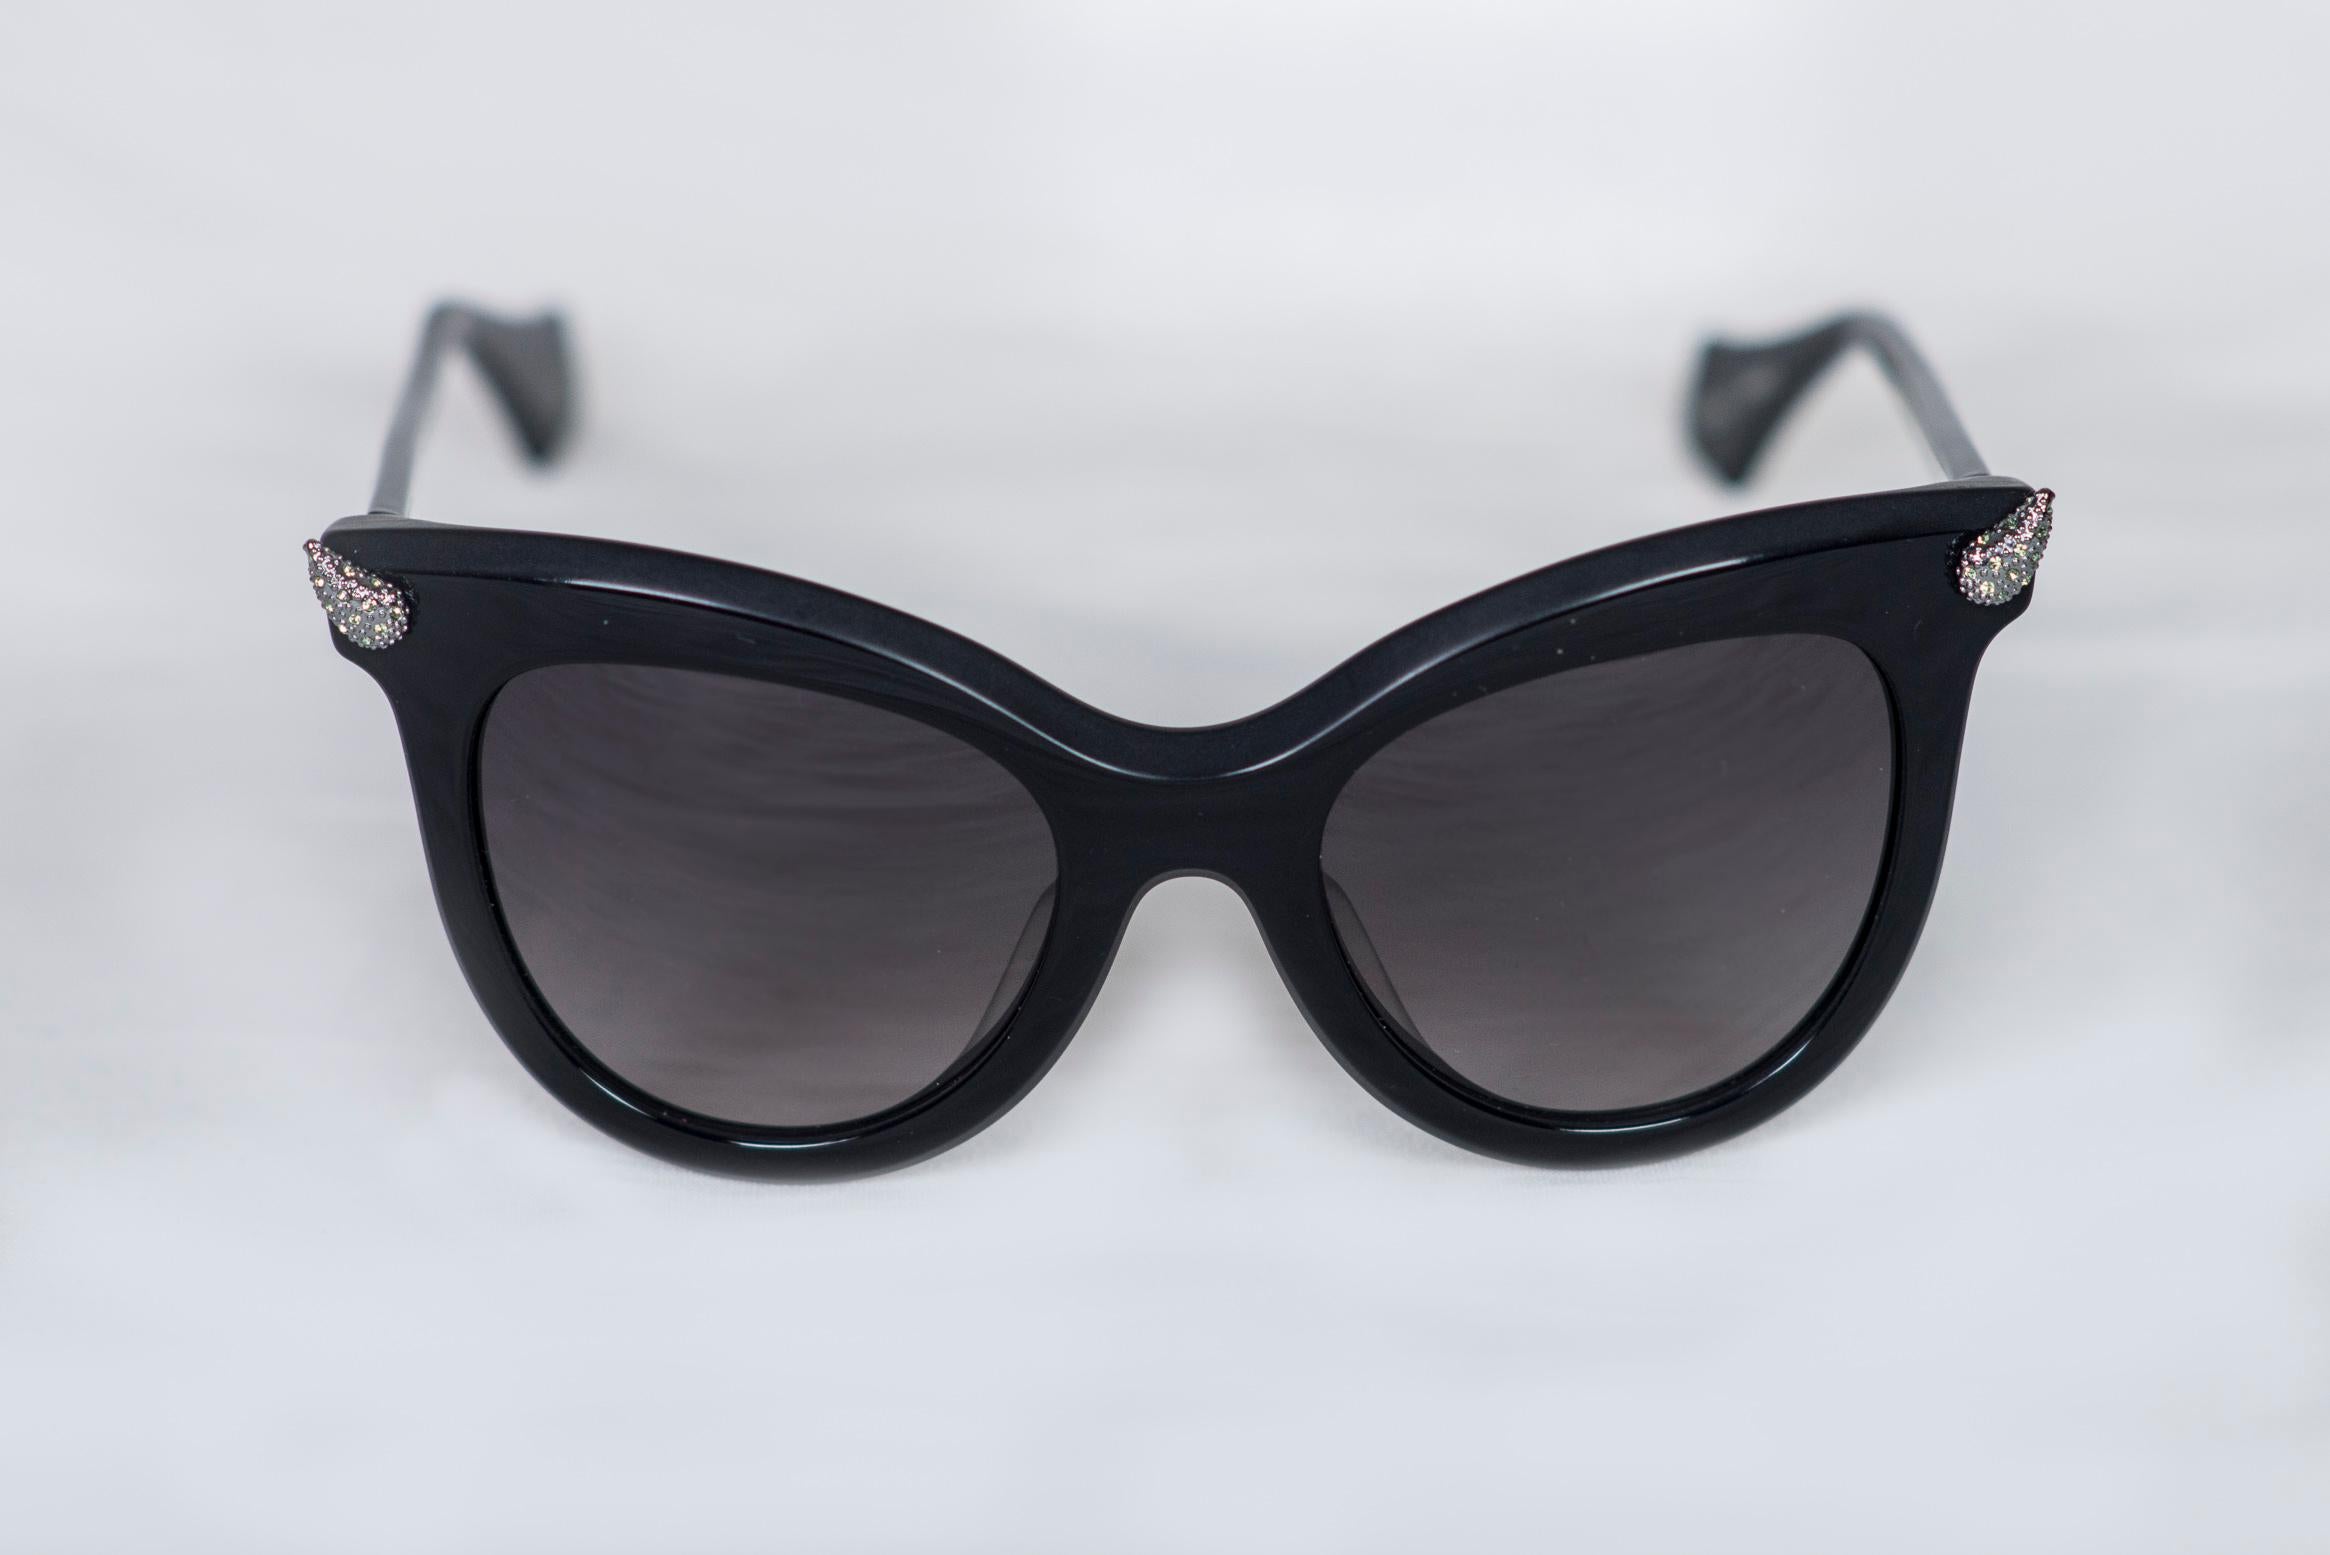 Crafted in Italy from glossy and unpolished black acetate, these Vivienne Westwood sunglasses have retro cat-eye frames and solid gradient lenses. These unconventional sunnies are finished with miniature horns to the corners of the frame, decorated